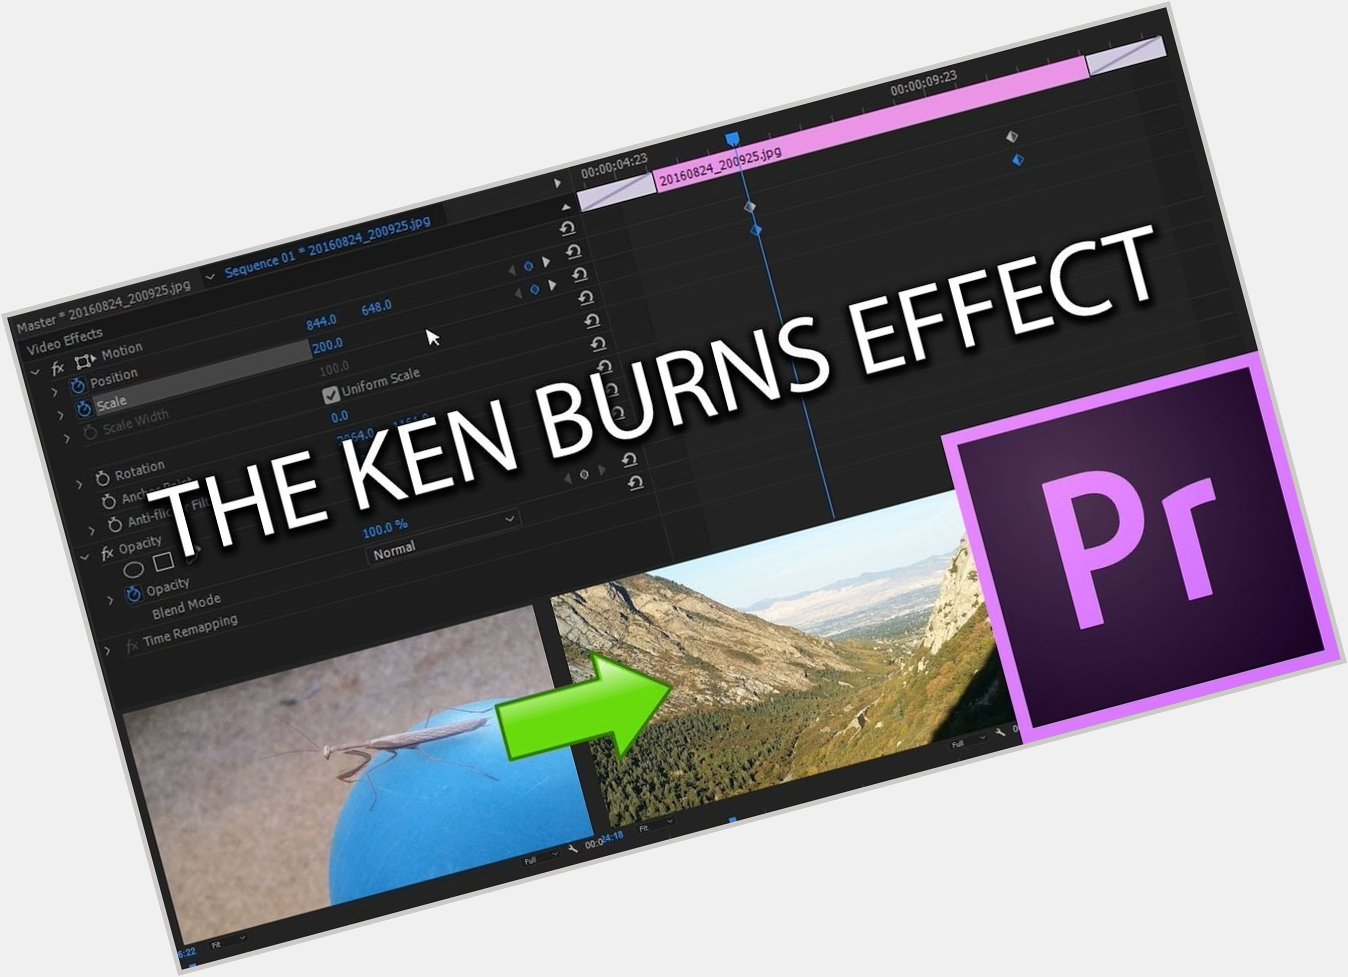 You know you\ve made it when Adobe names an effect after you. Happy Birthday Ken Burns! 